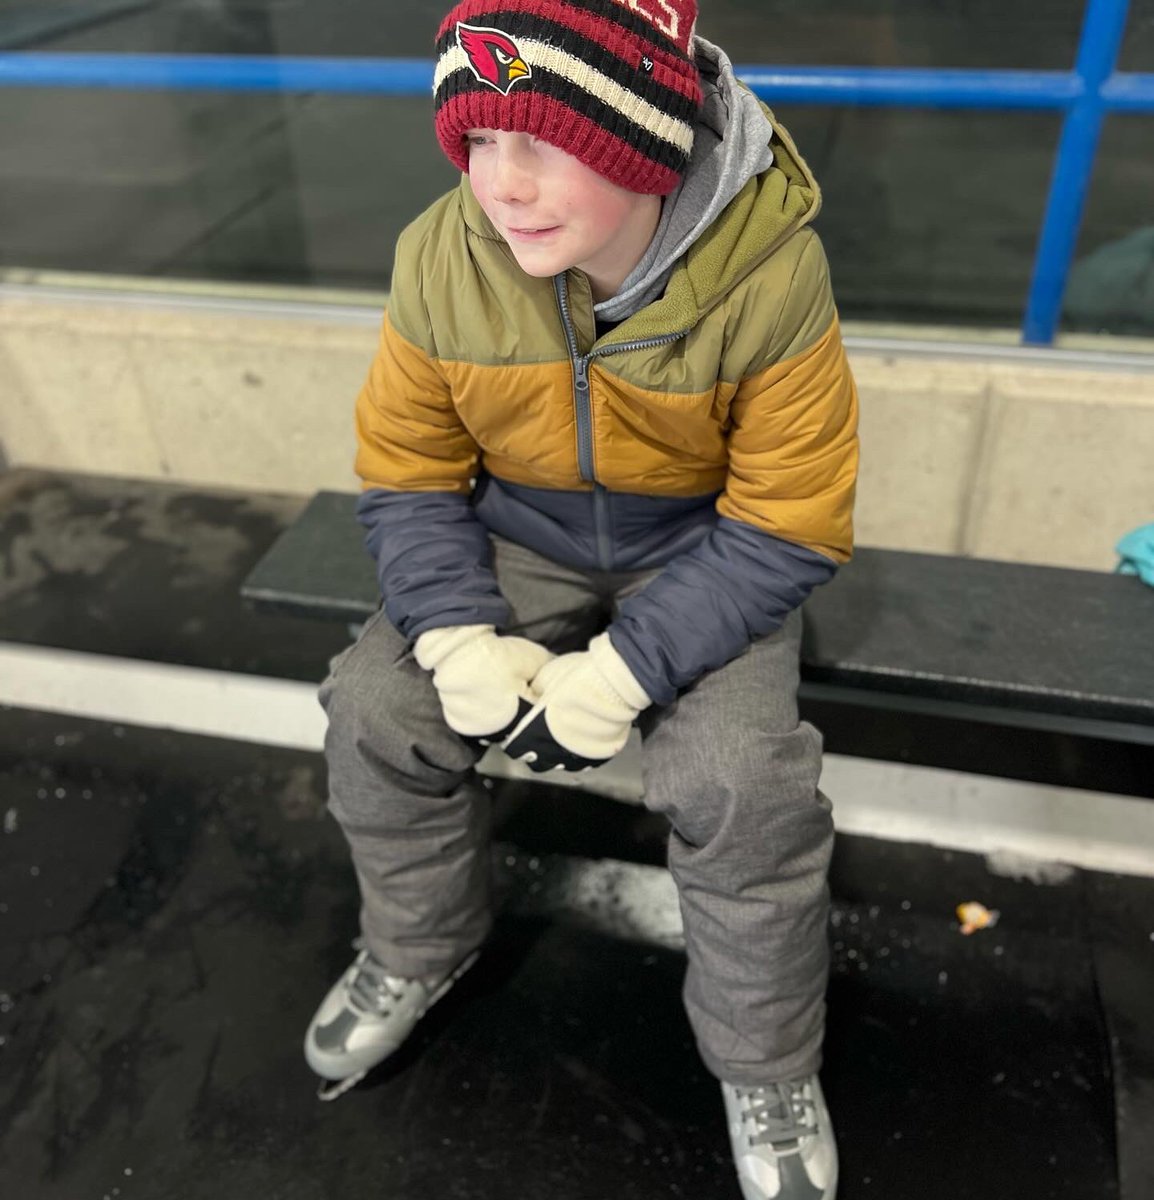 Incredibly proud of my boy for giving ice skating a try on his school field trip today. It’s definitely one of the hardest things for him to do. Without a doubt our #cpwarrior 💚